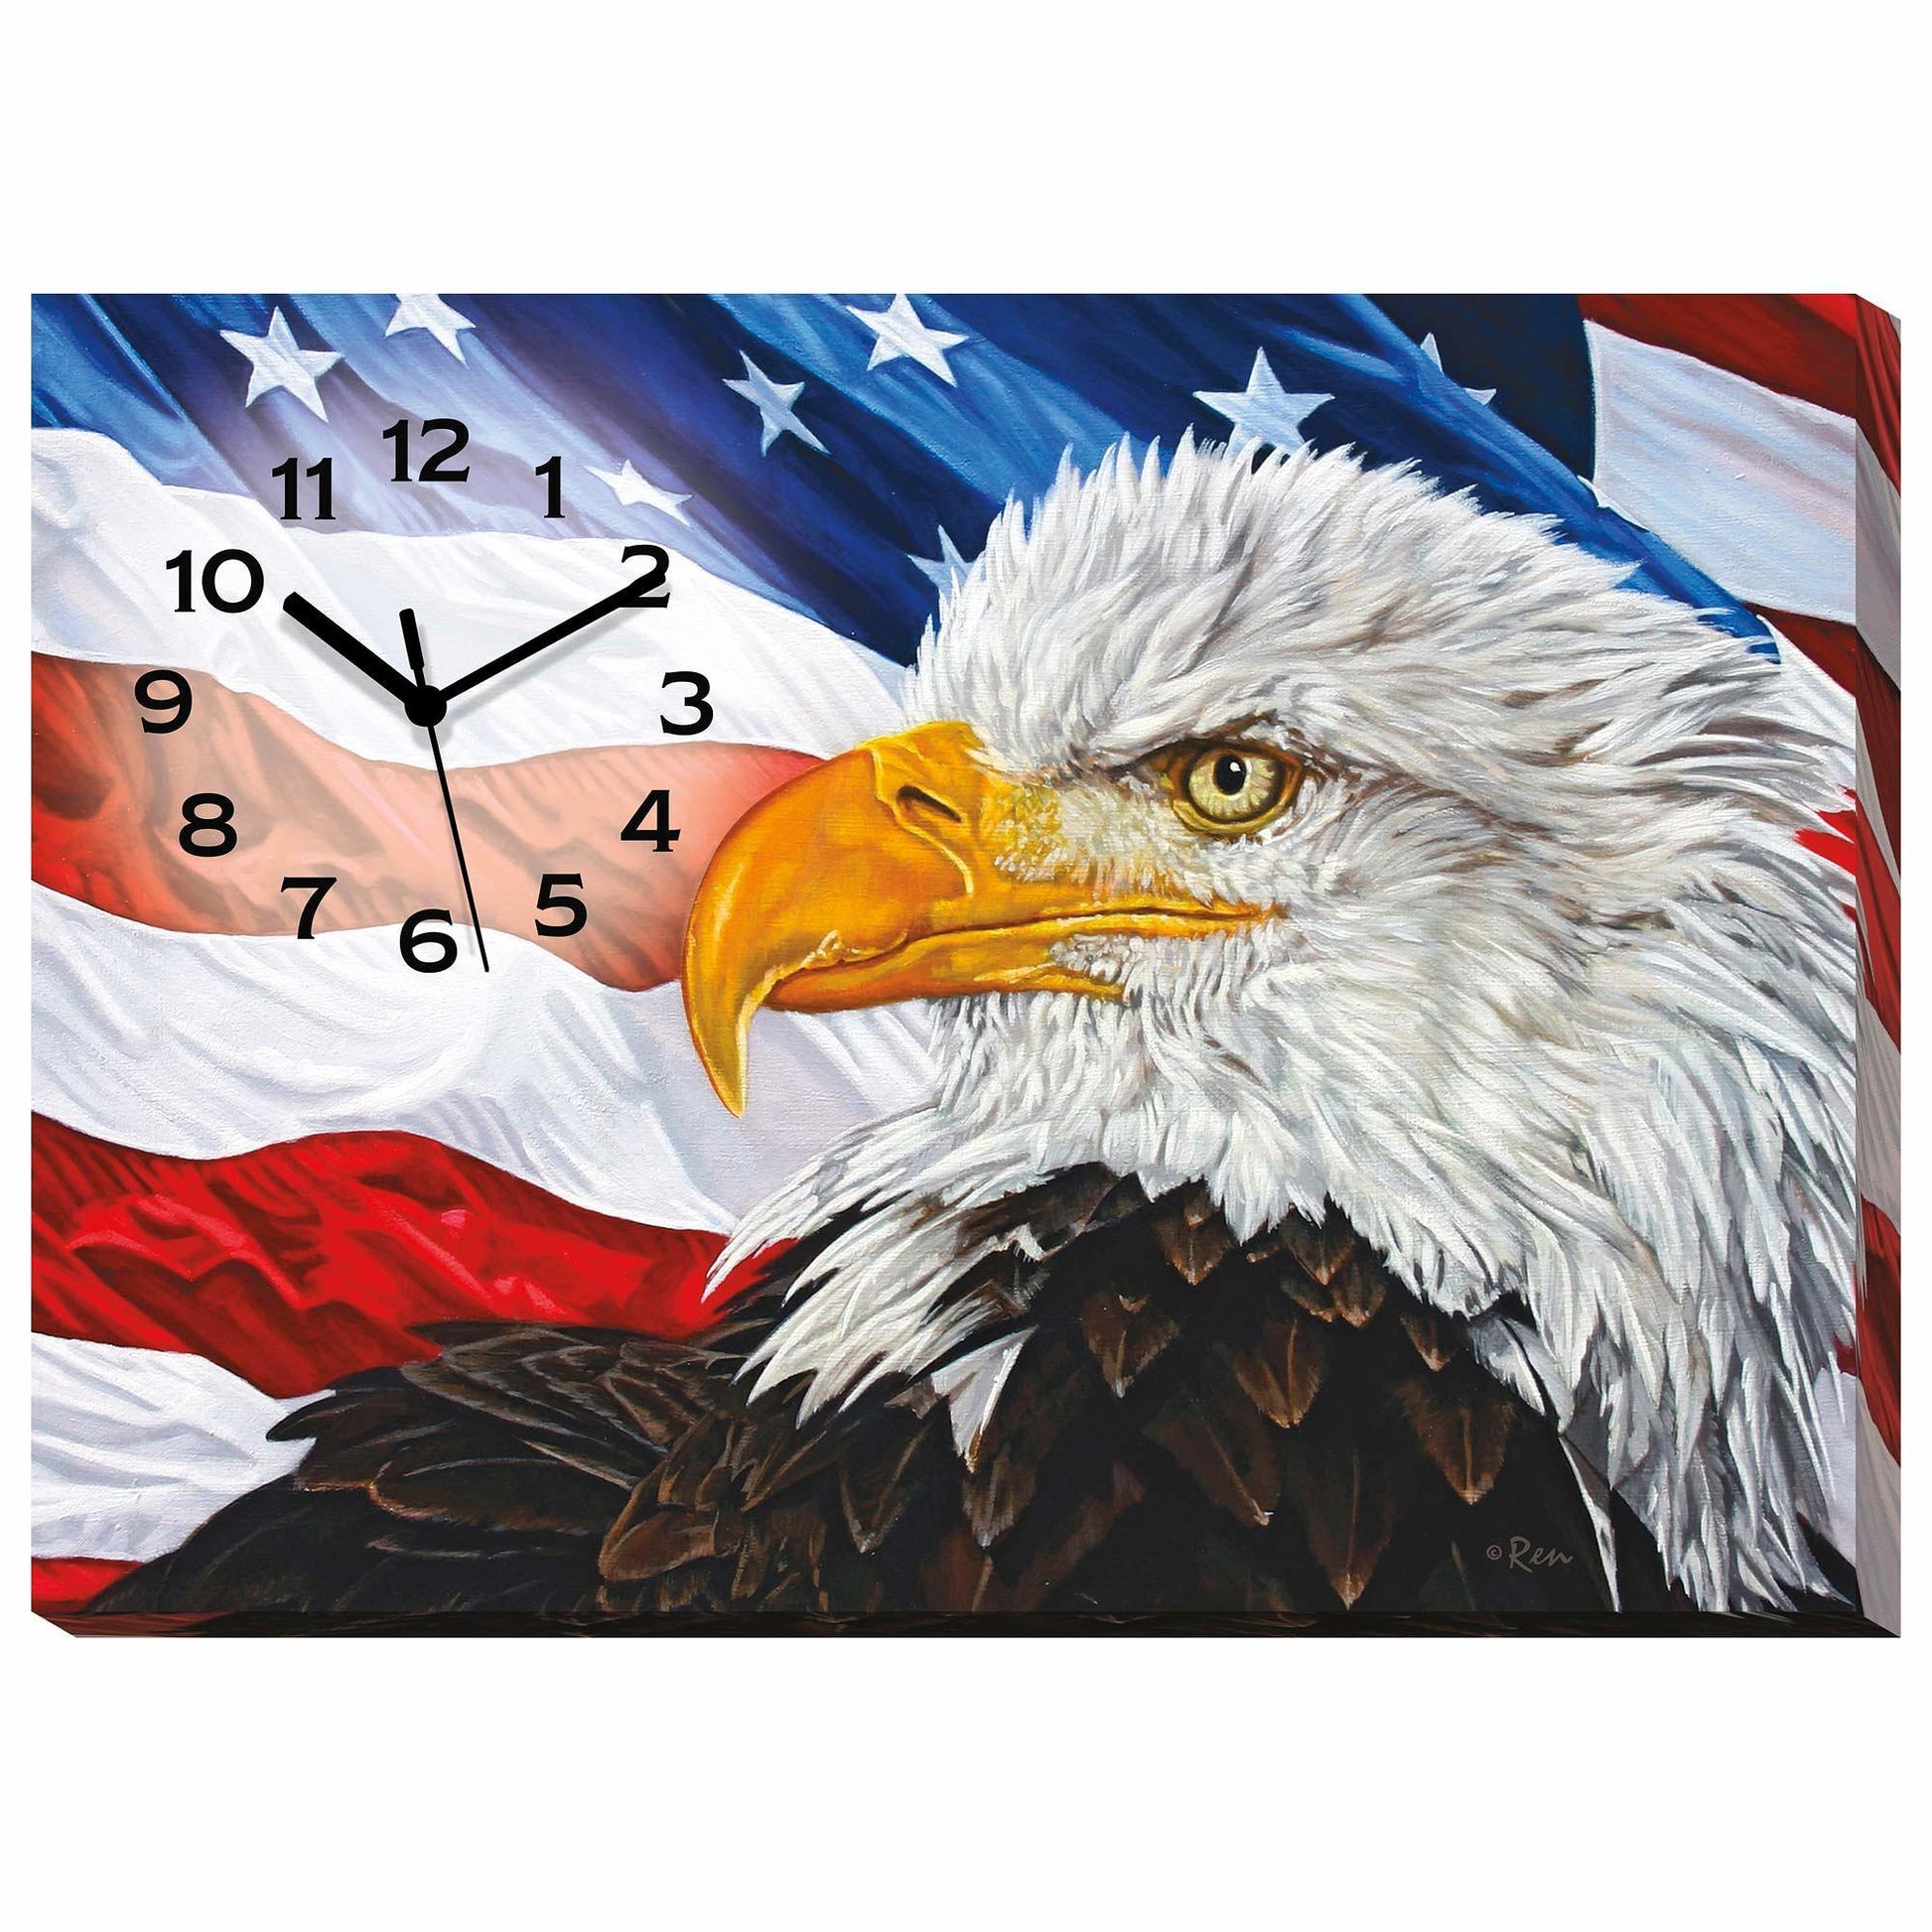 Let Freedom Ring—Bald Eagle Canvas Clock - Wild Wings